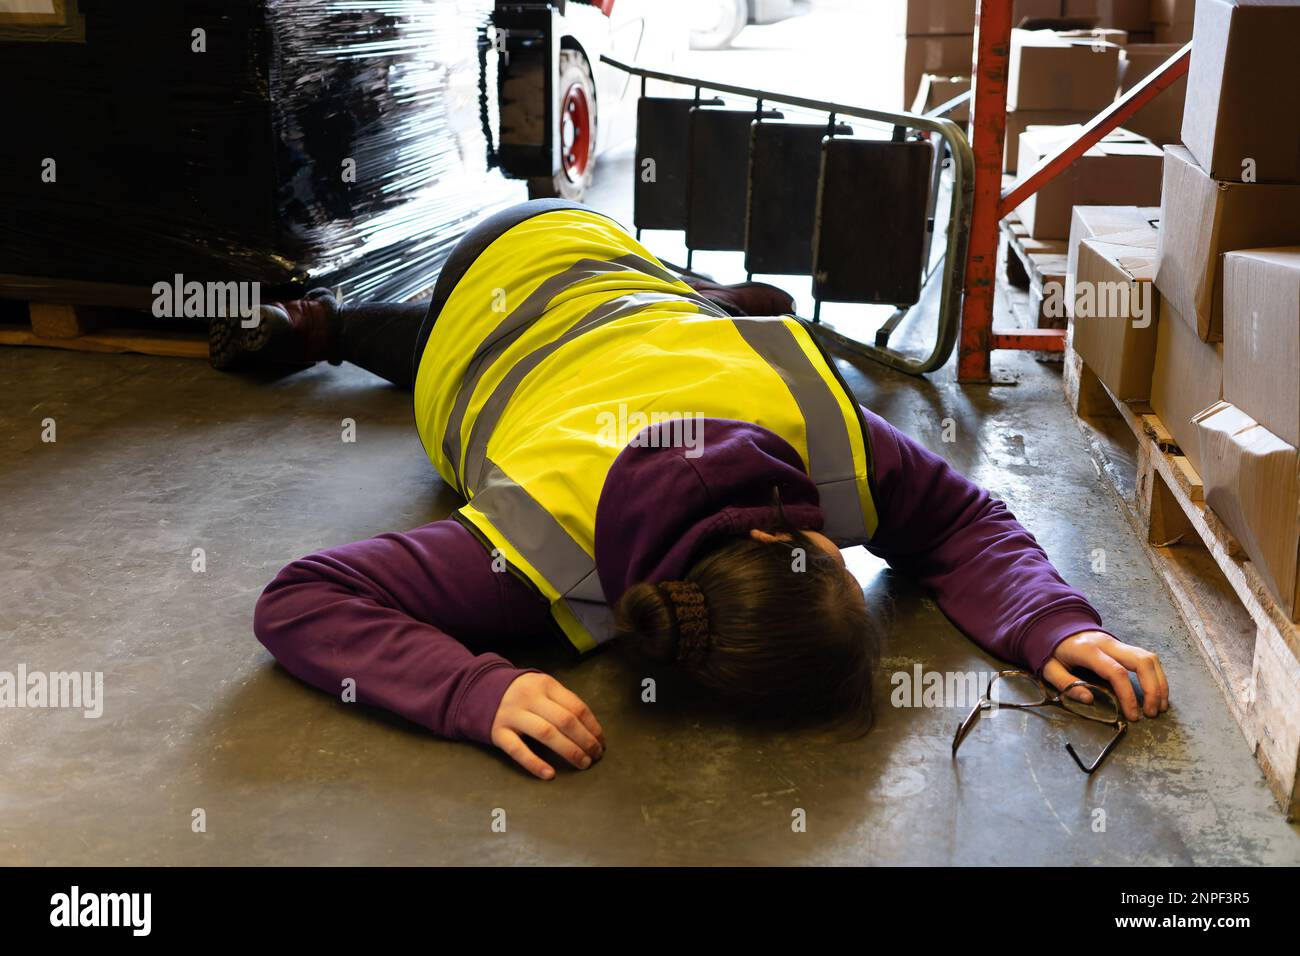 Accident in the work place, young woman lies injured after falling from step ladder onto the factory floor Stock Photo